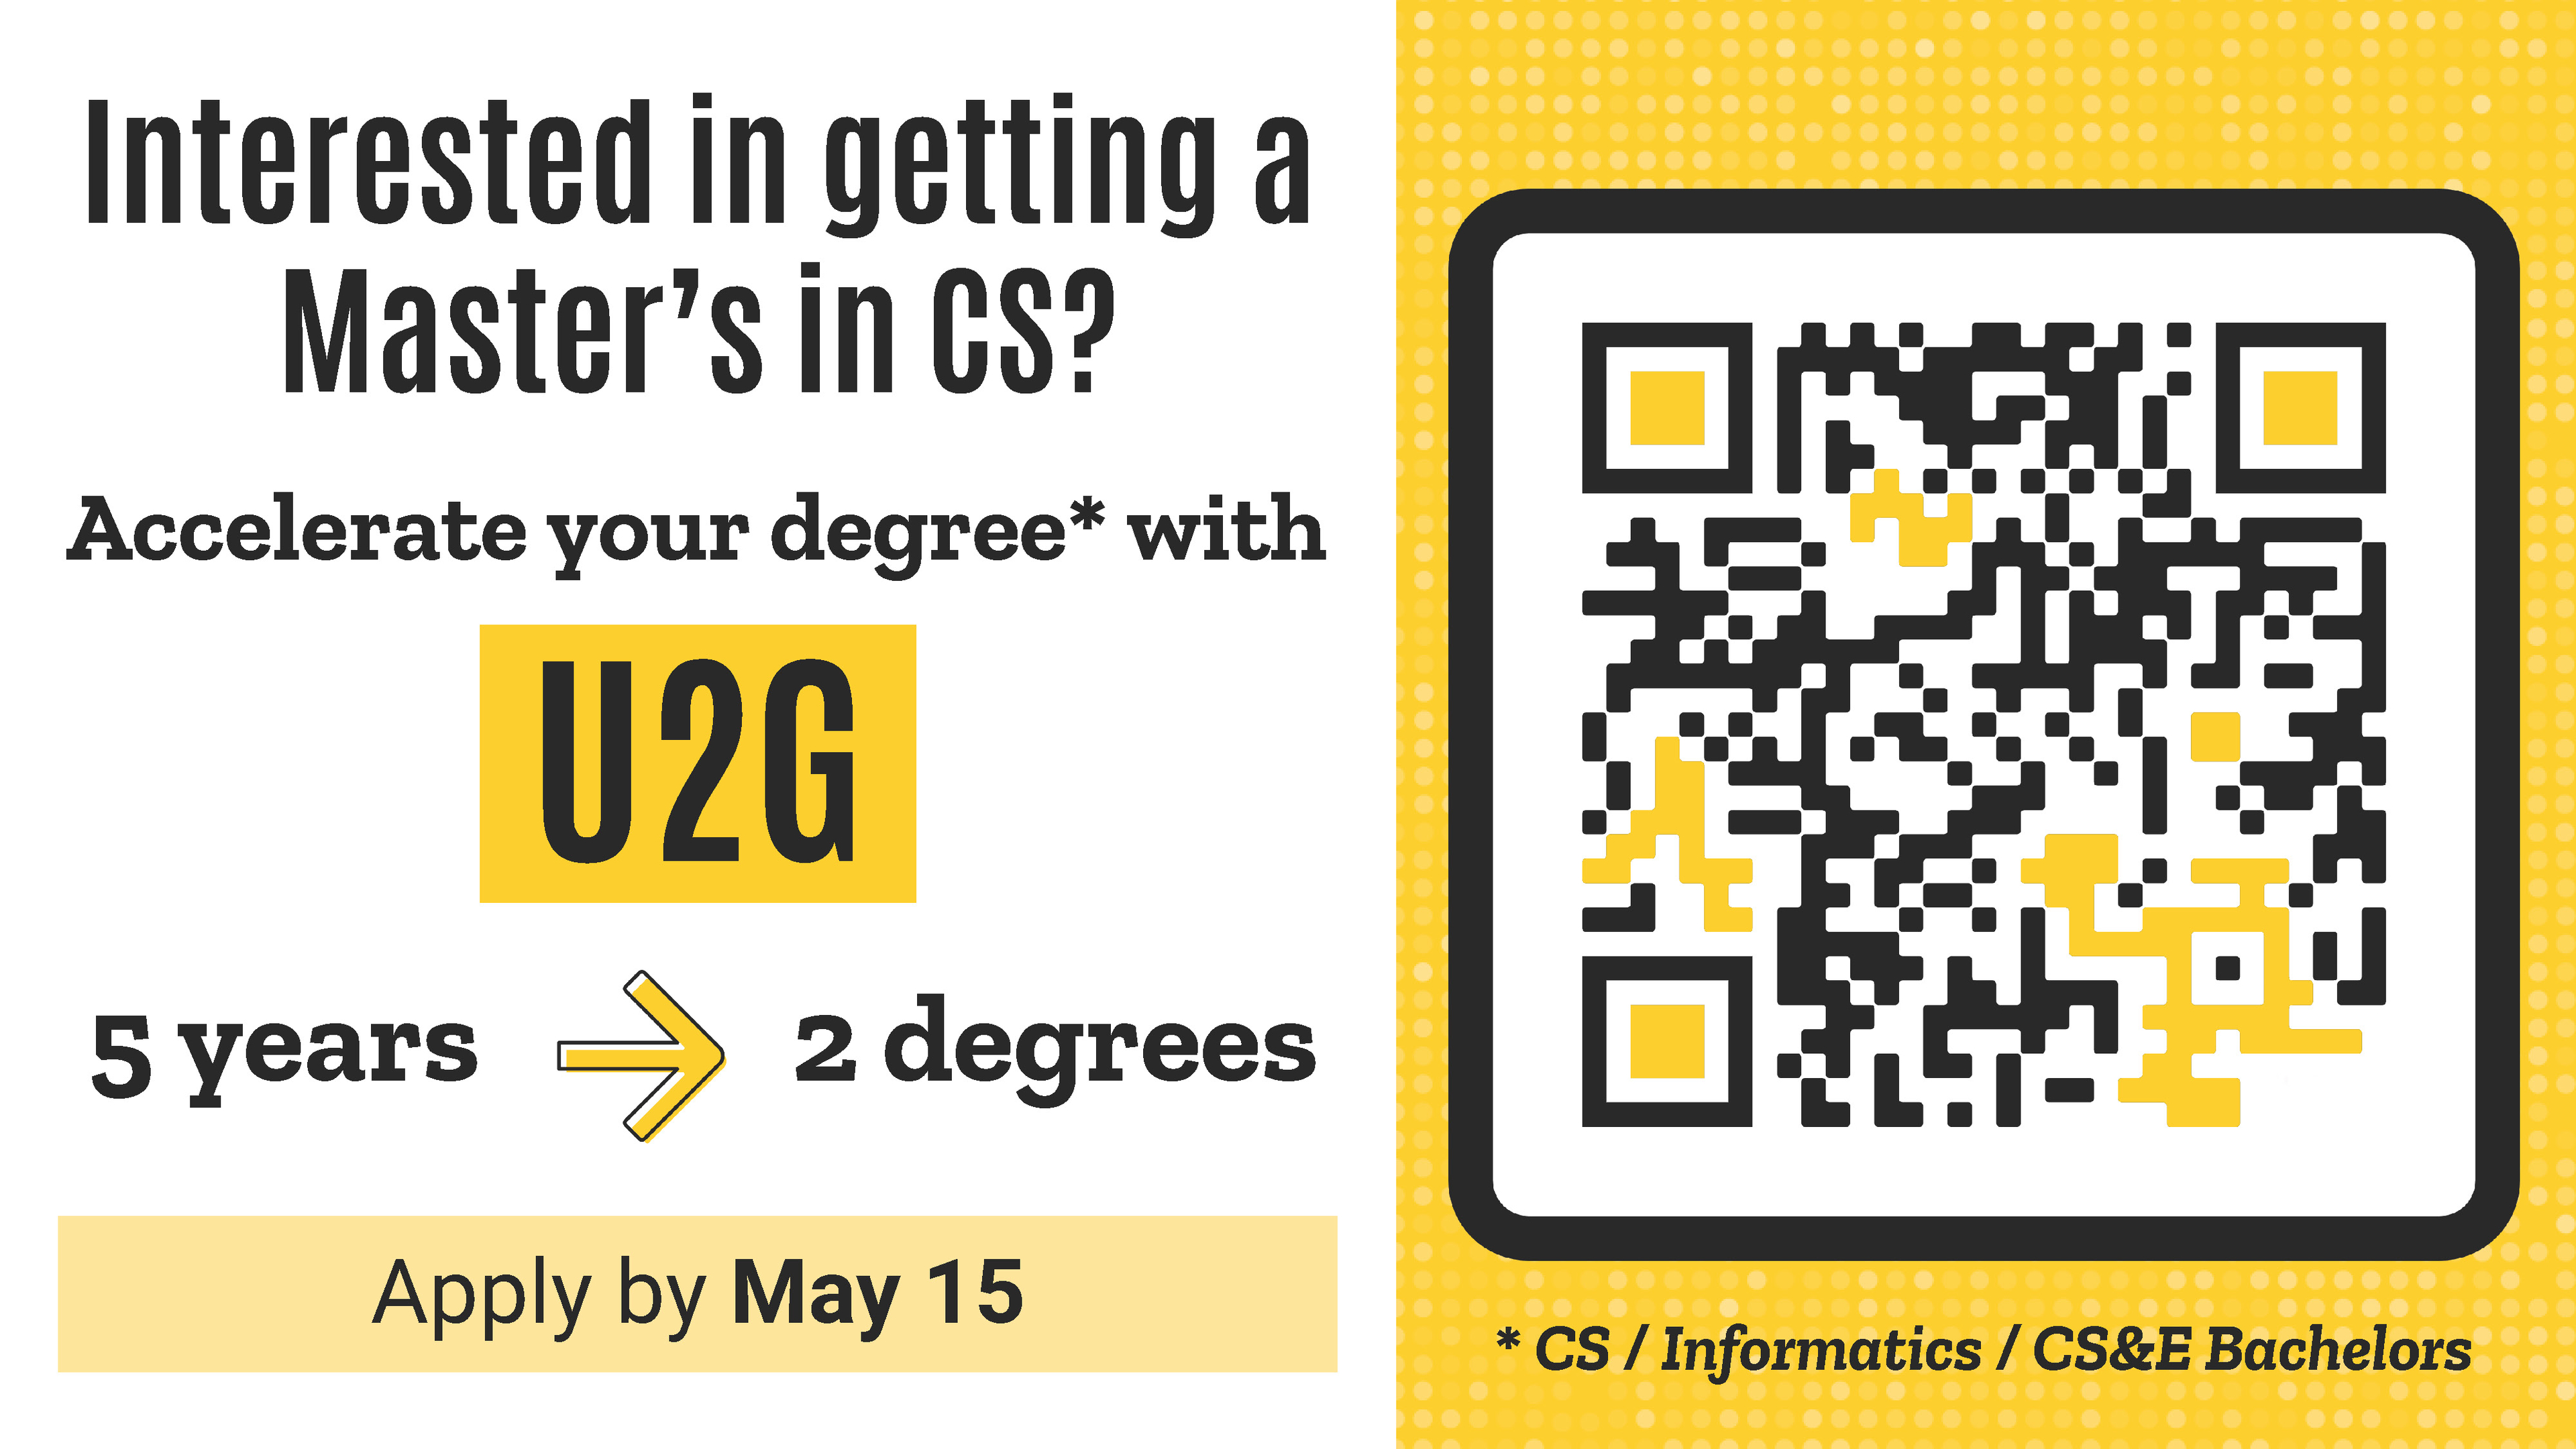 Accelerate your degree* with Apply by May 15 Interested in getting a Master’s in CS? 5 years 2 degrees U2G * CS / Informatics / CS&E Bachelors